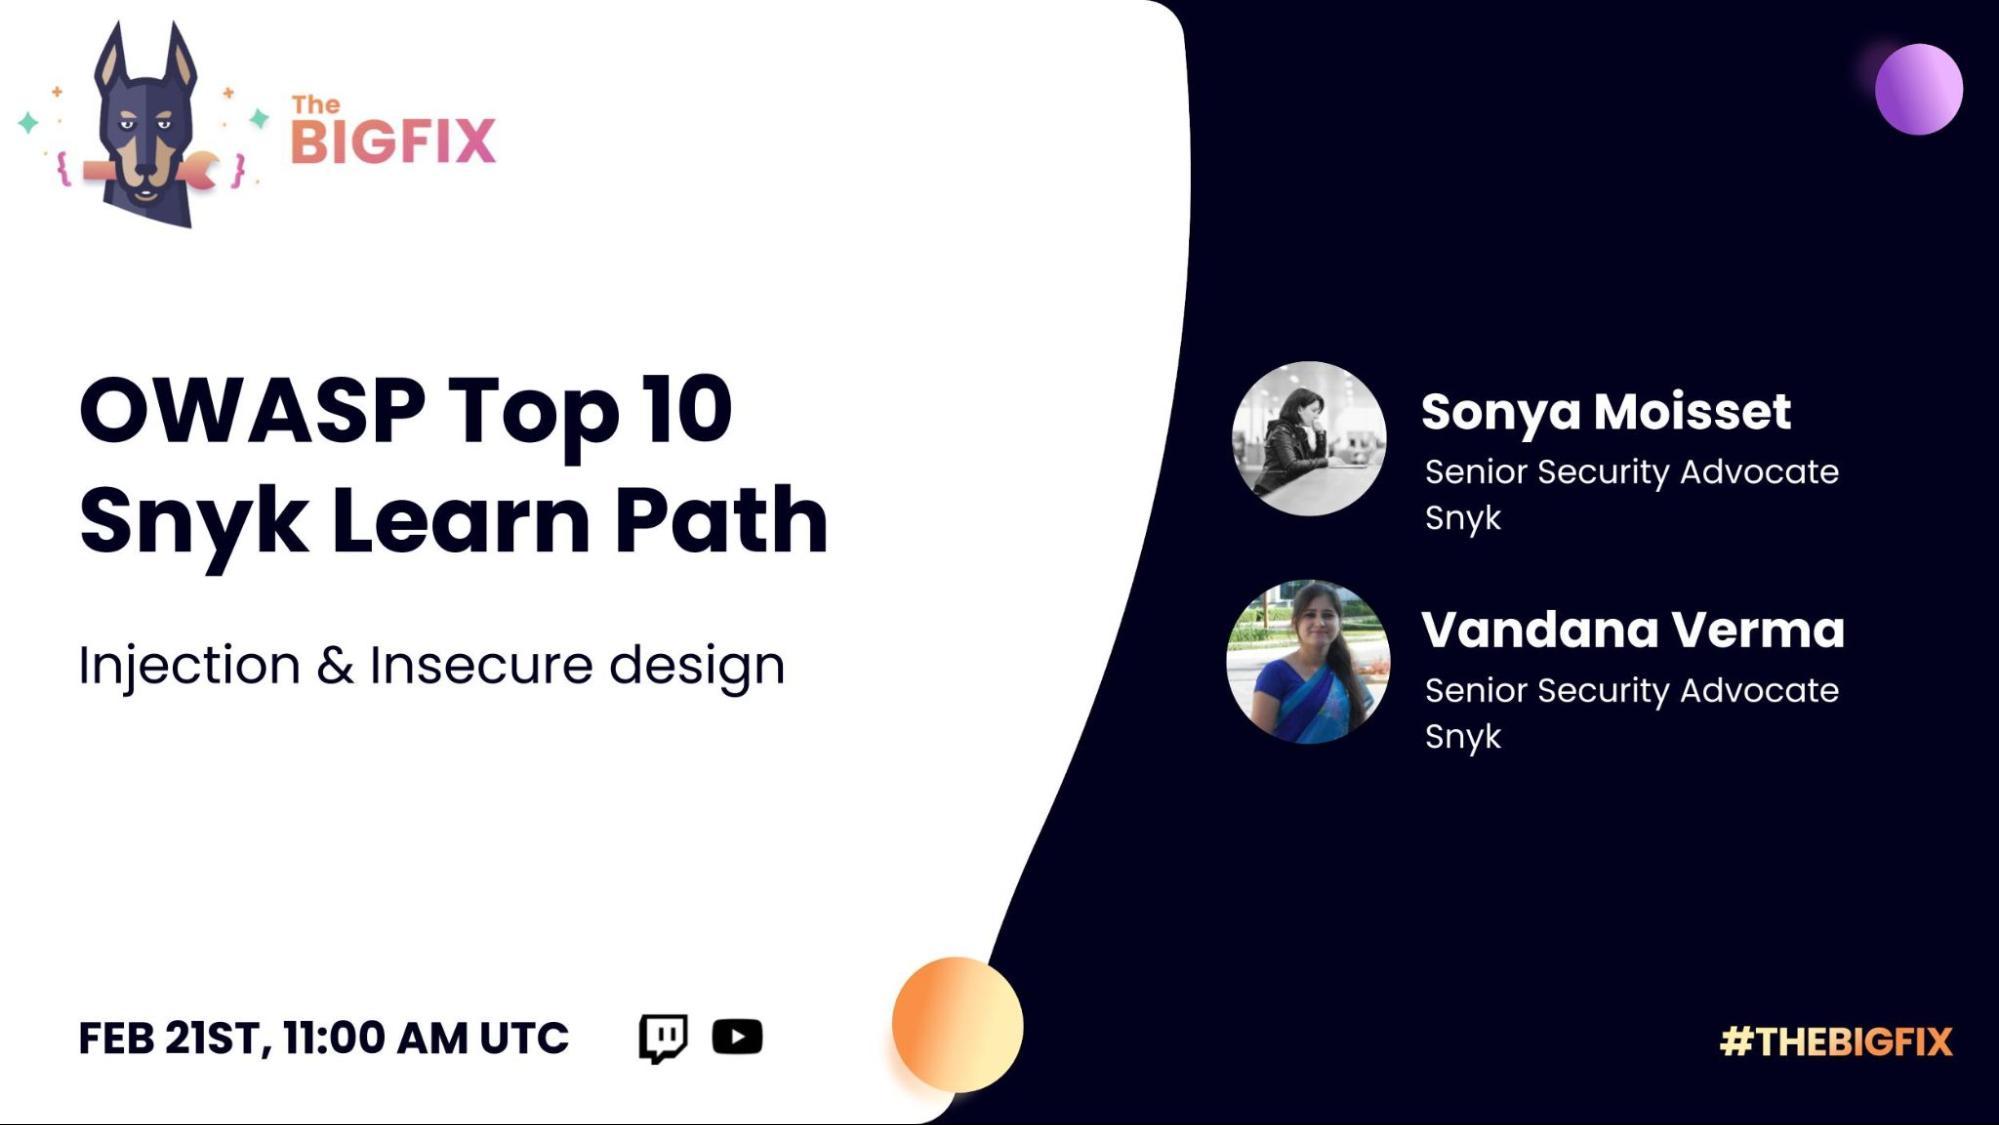 Announcement for OWASP Top 10 Snyk Learn Path livestream on Feb. 21st at 11:00 AM, UTC.